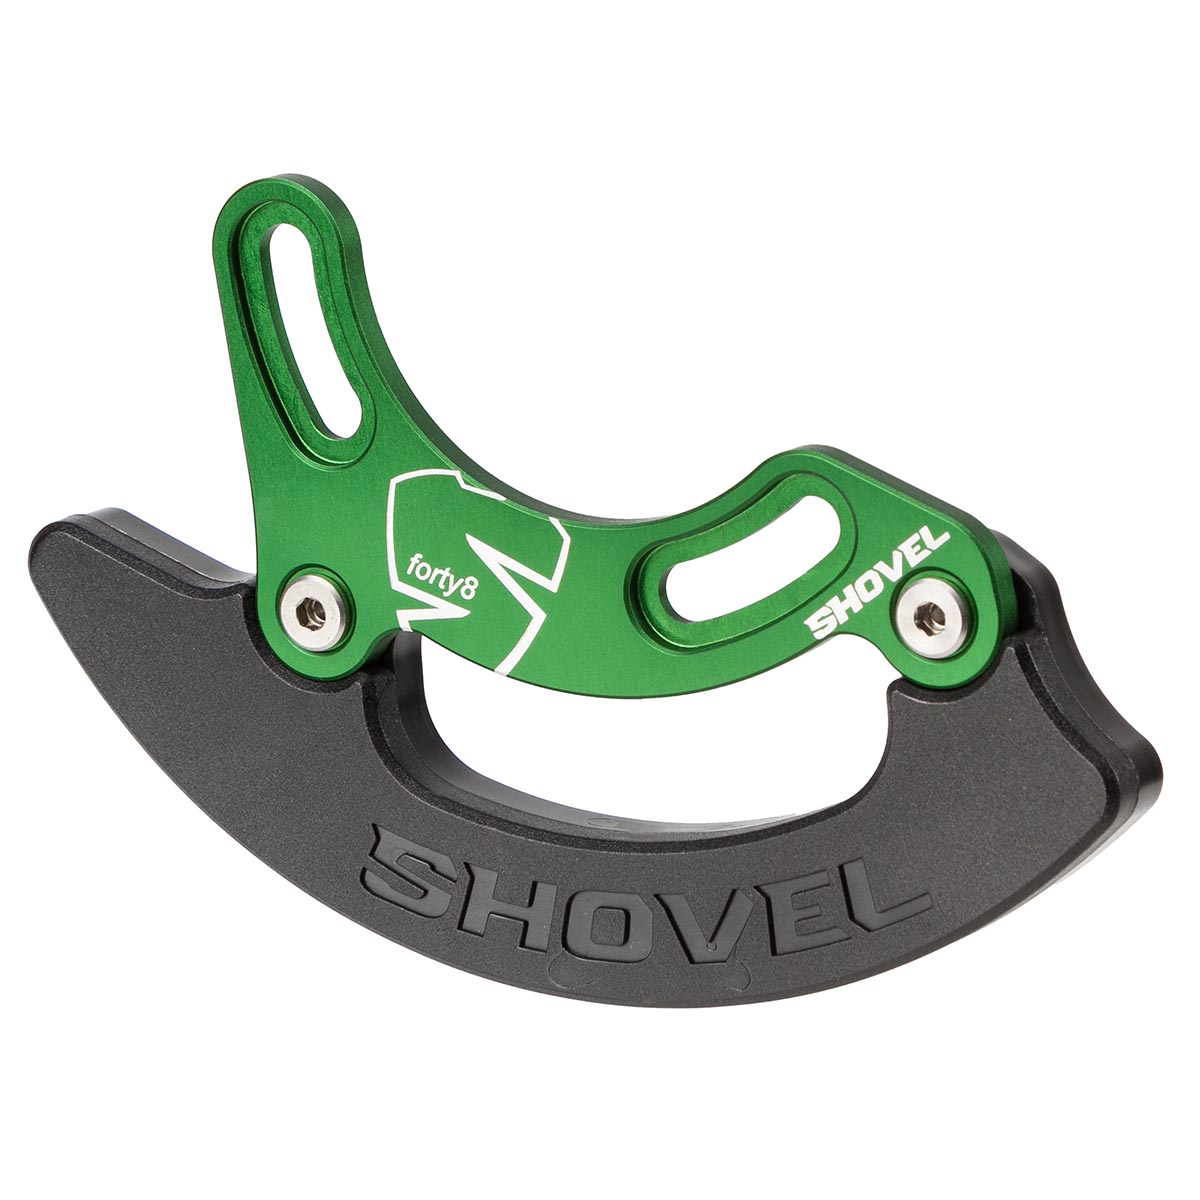 Shovel Chain Guide Forty8 Green, 26-34 Teeth, ISCG05